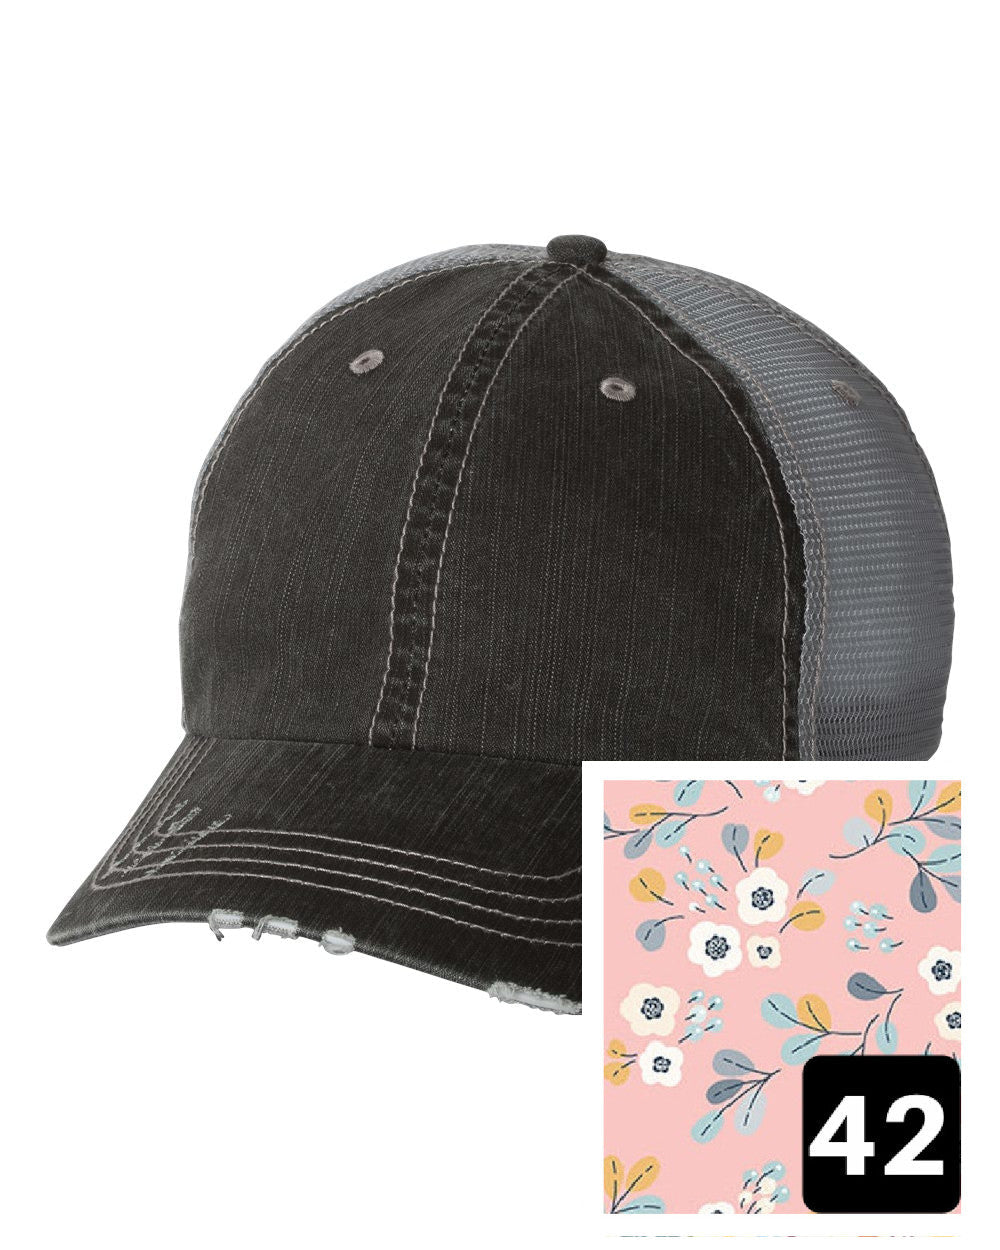 gray distressed trucker hat with light blue and pink mosaic fabric state of Maryland